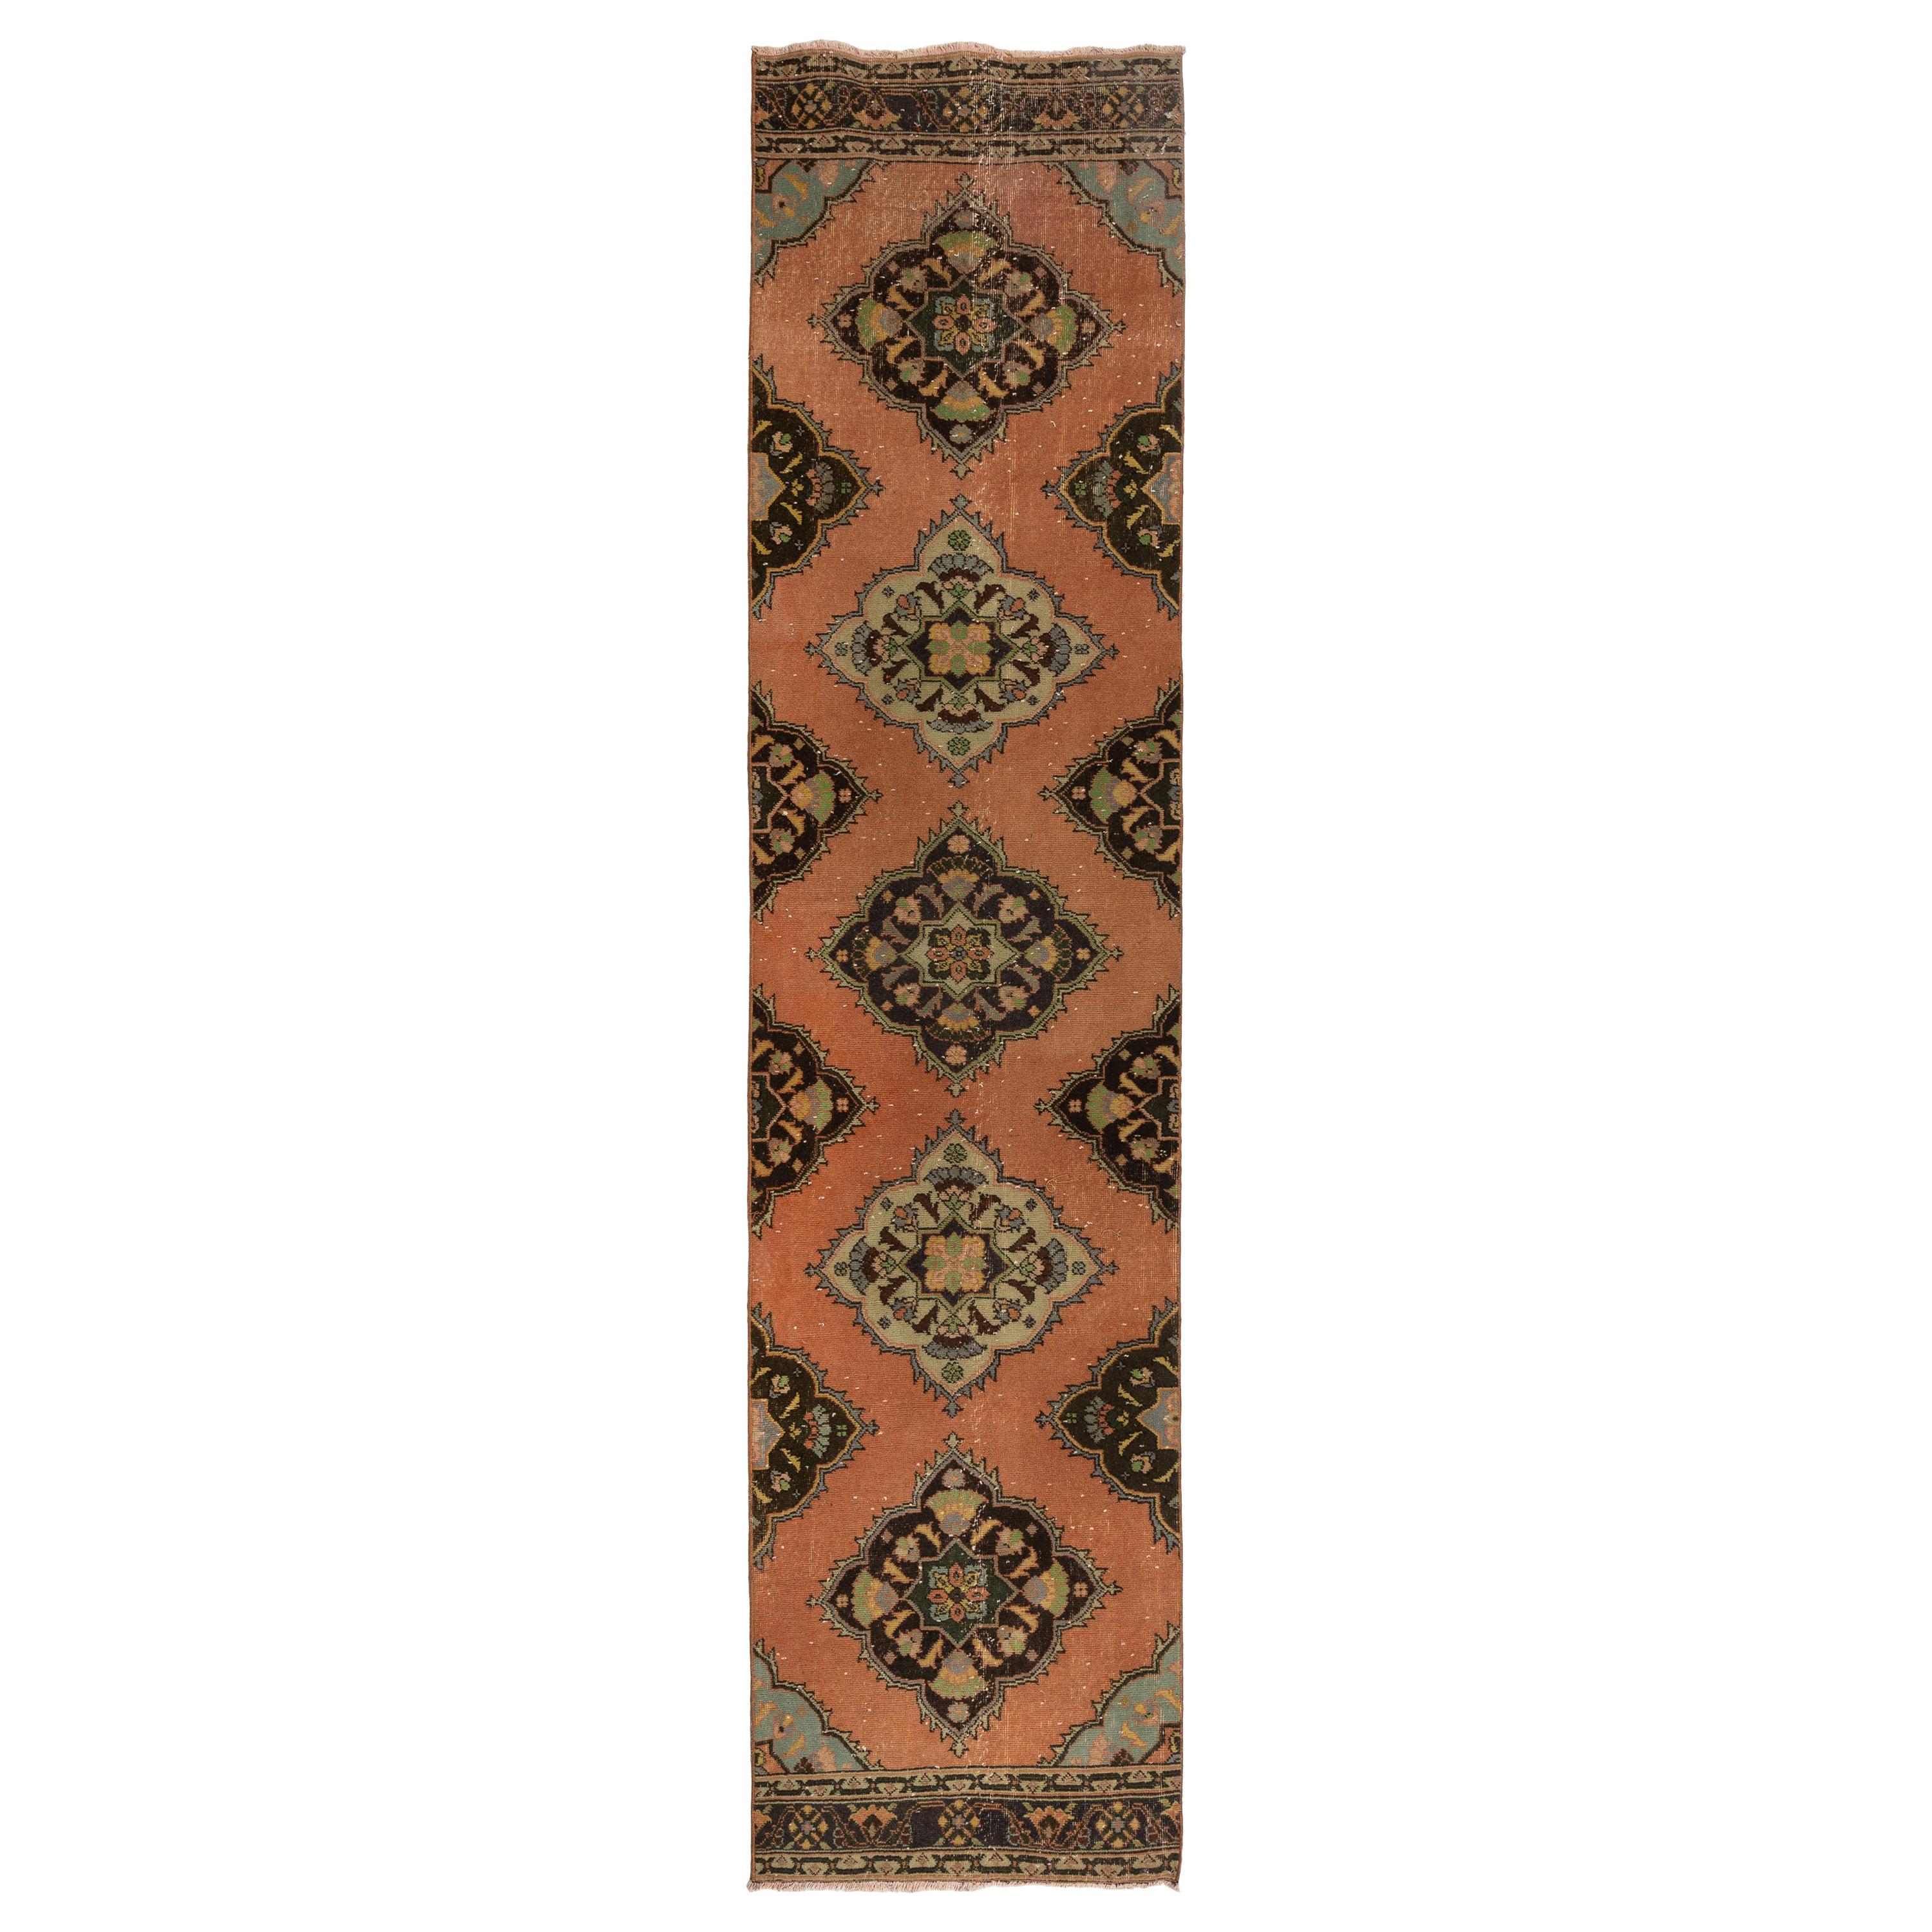 3x12.7 Ft Vintage Anatolian Village Runner Rug, 100% Wool Hand-Knotted Carpet